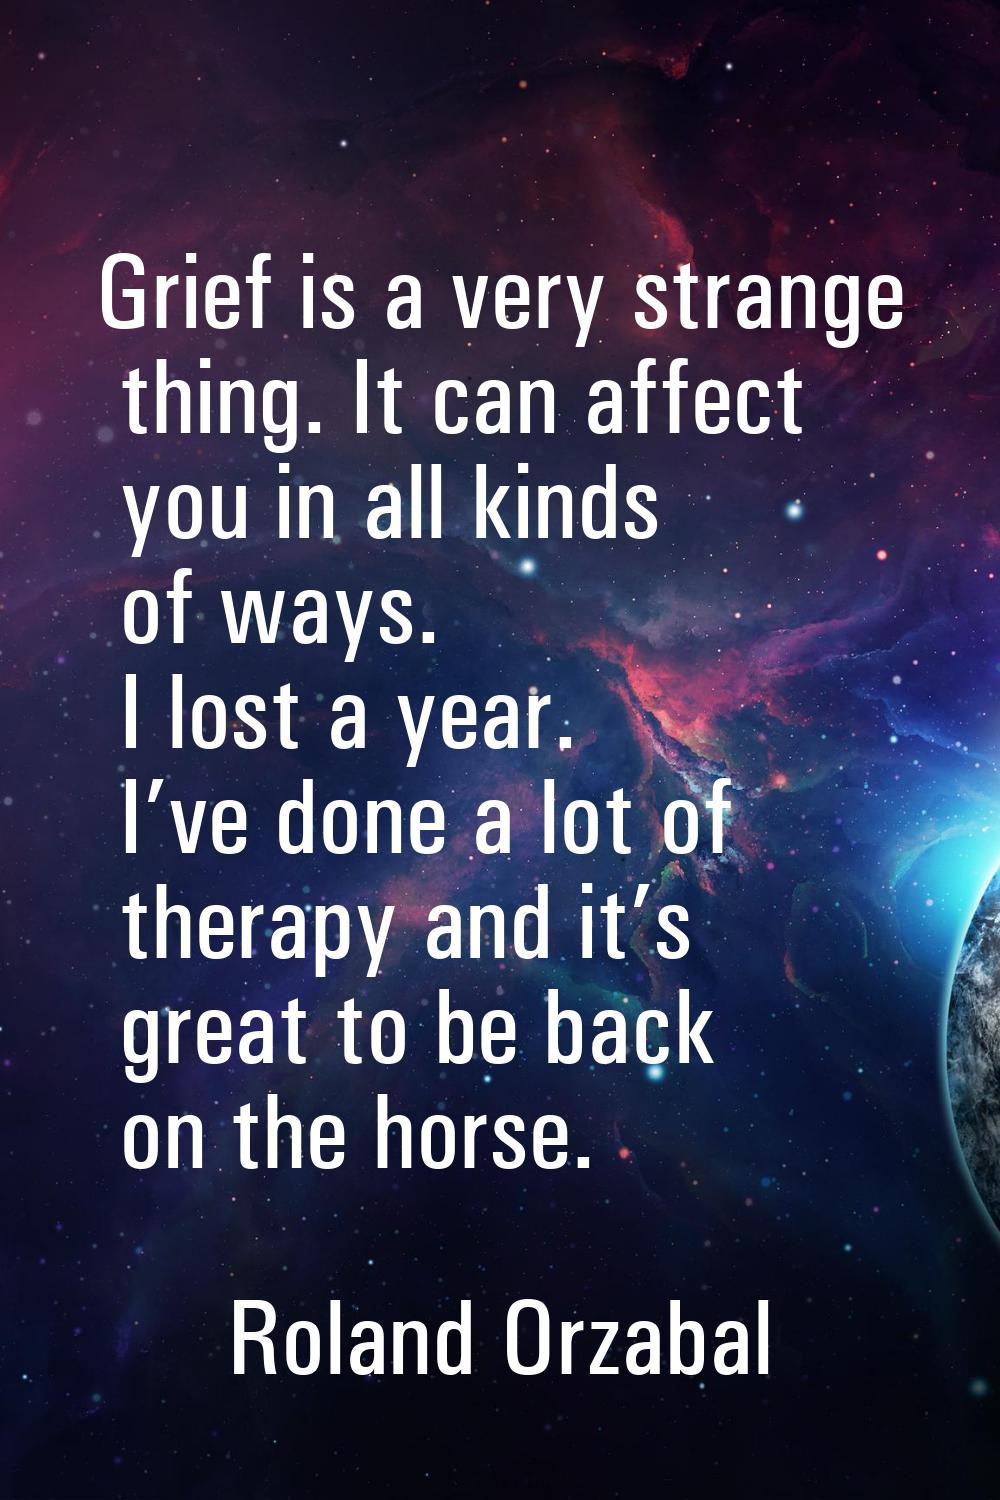 Grief is a very strange thing. It can affect you in all kinds of ways. I lost a year. I’ve done a l